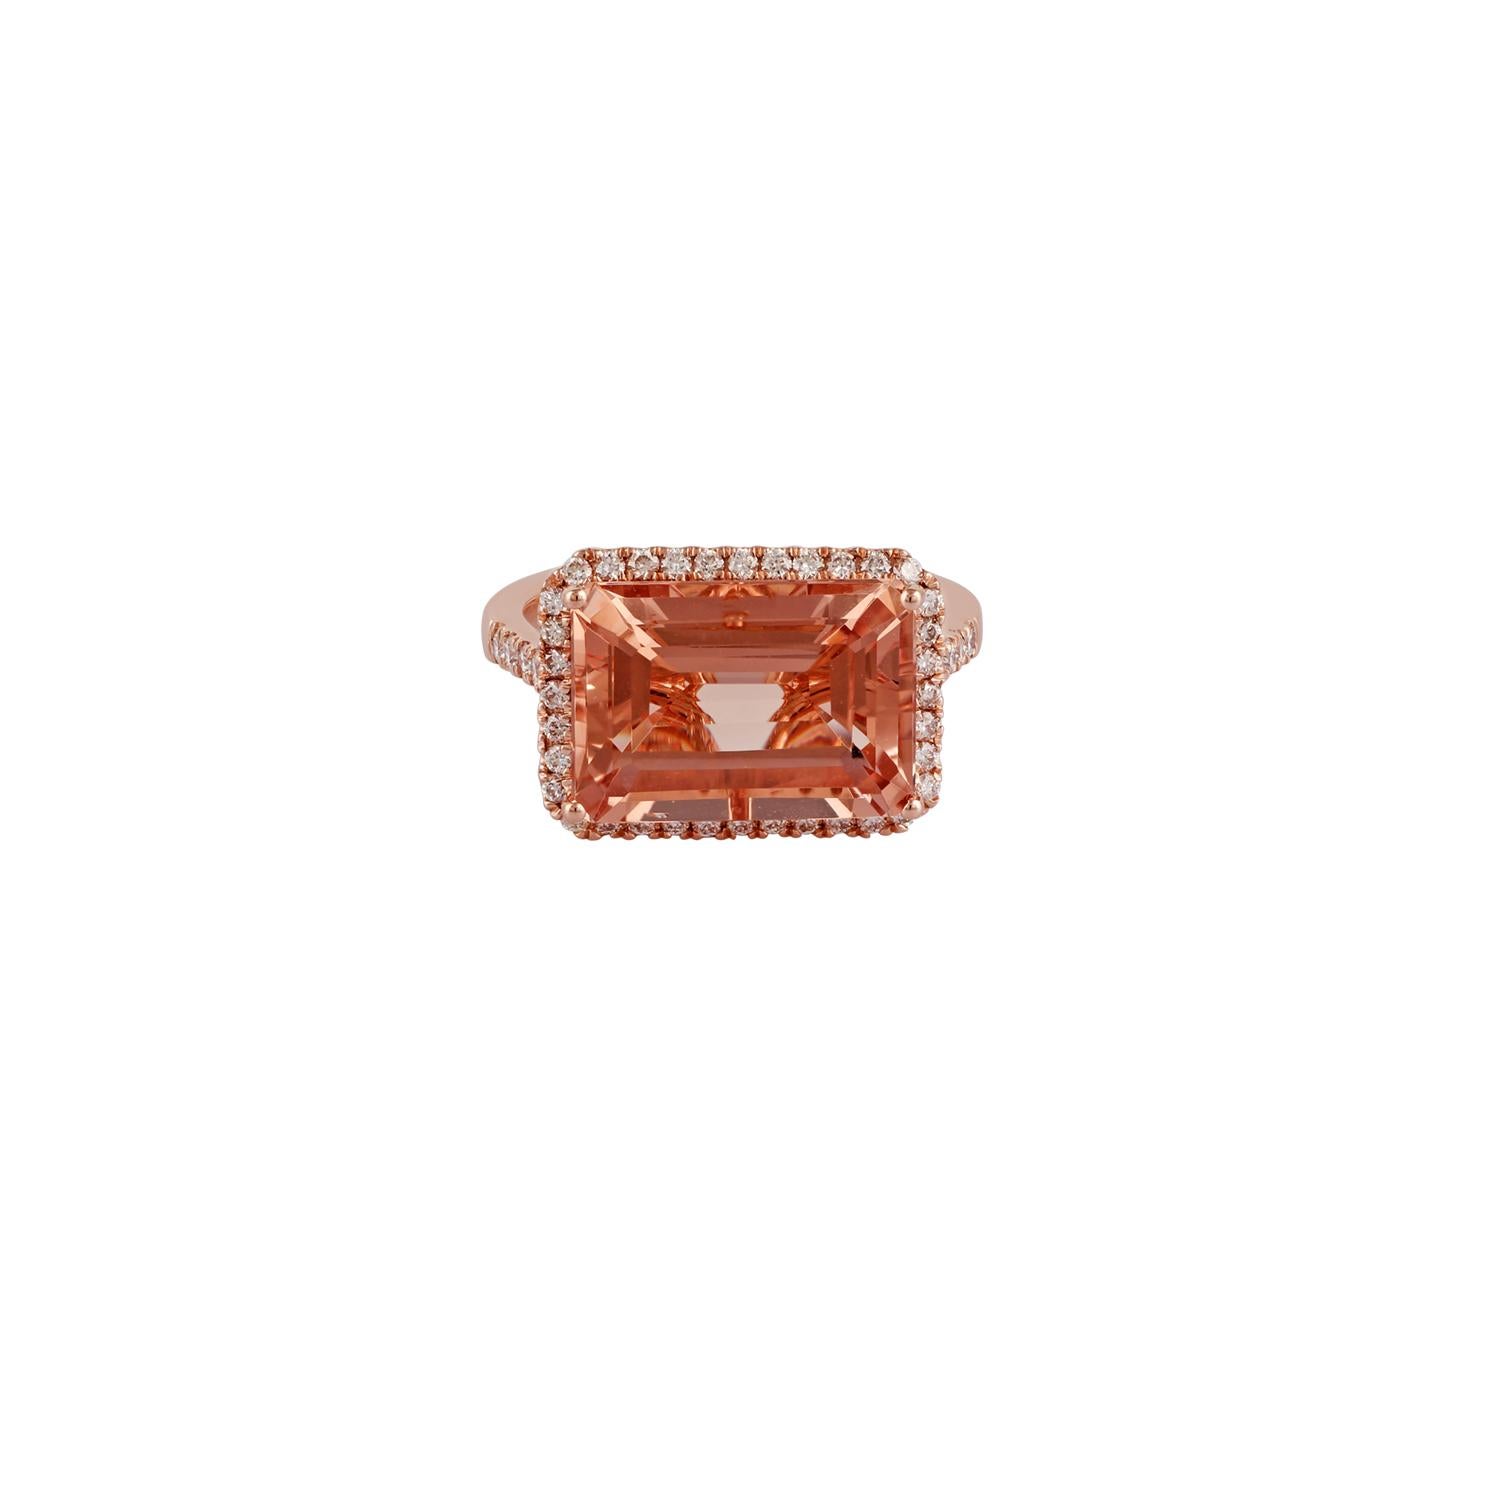 This is an elegant ring of morganite & diamond studded in 18k rose gold features an octagon-shaped morganite weight 6.57 carats & 48 pieces of round shaped diamonds weight 0.50 carats this entire ring is made of 18k rose gold weight 4.46 grams, this